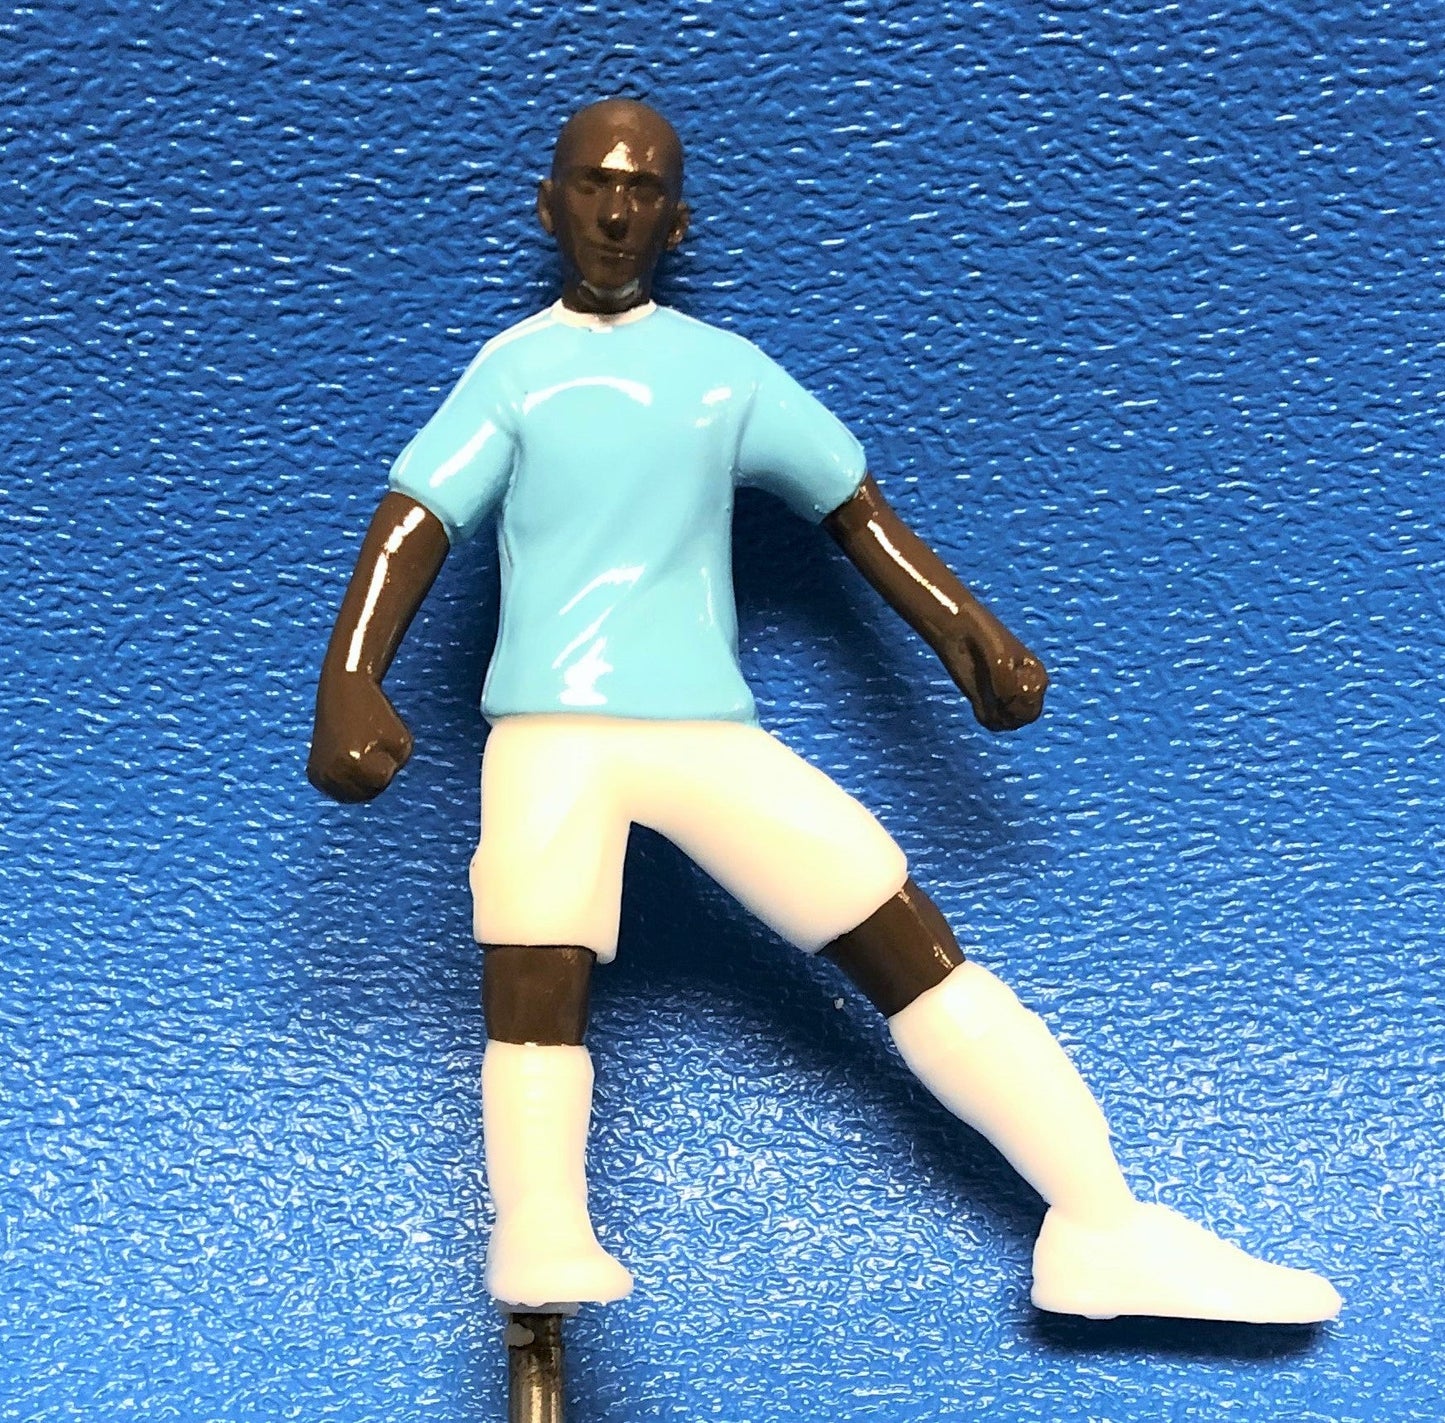 PLAYER (RIGHT DEFENDER) LIGHT BLUE / CYAN [SK4013CYN] for ICE game(s)